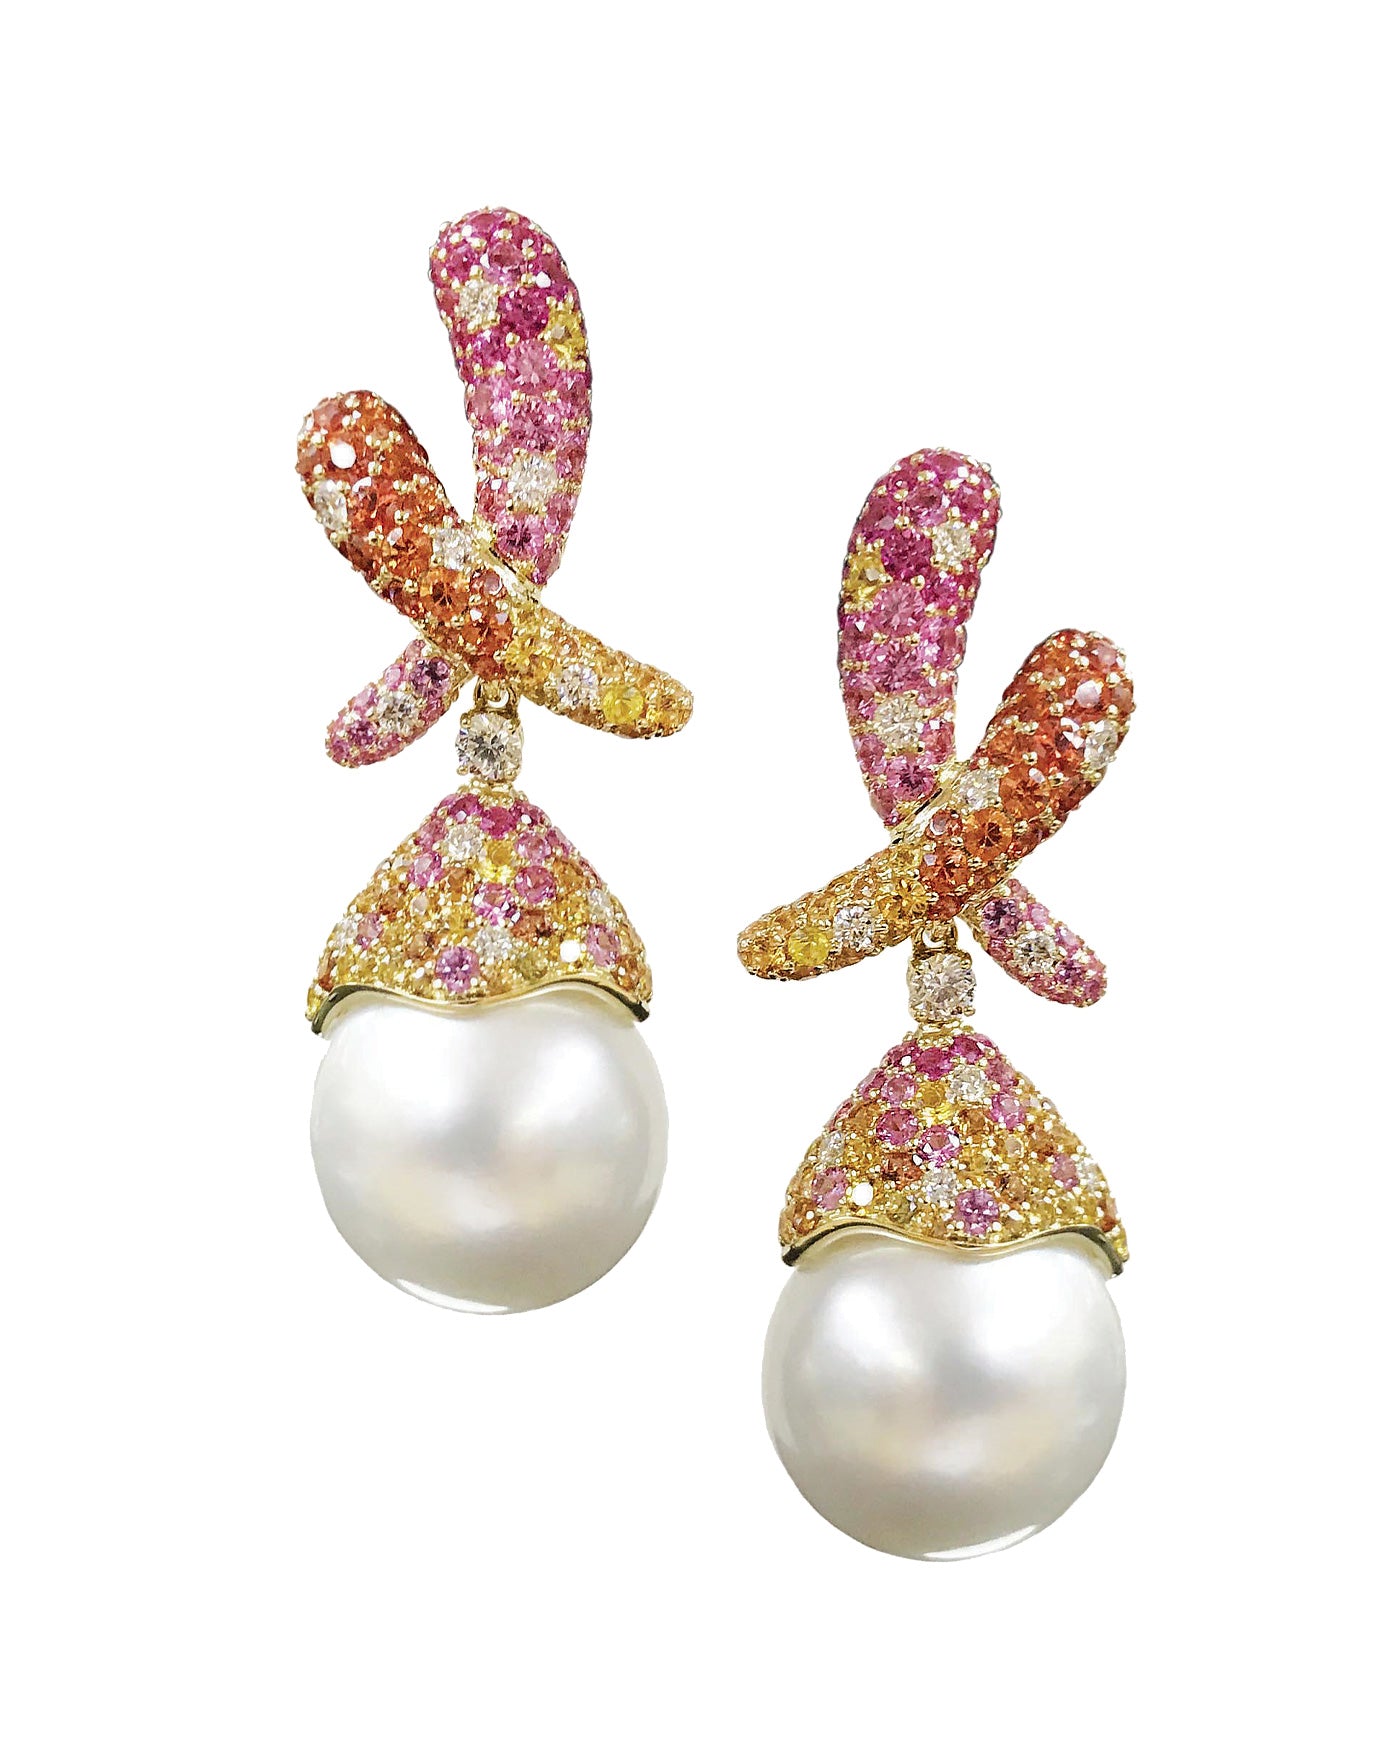 Kiss Earrings with Australian South Sea pearl drops enhanced with multi colored sapphires and diamonds, crafted in 18 karat white and yellow gold